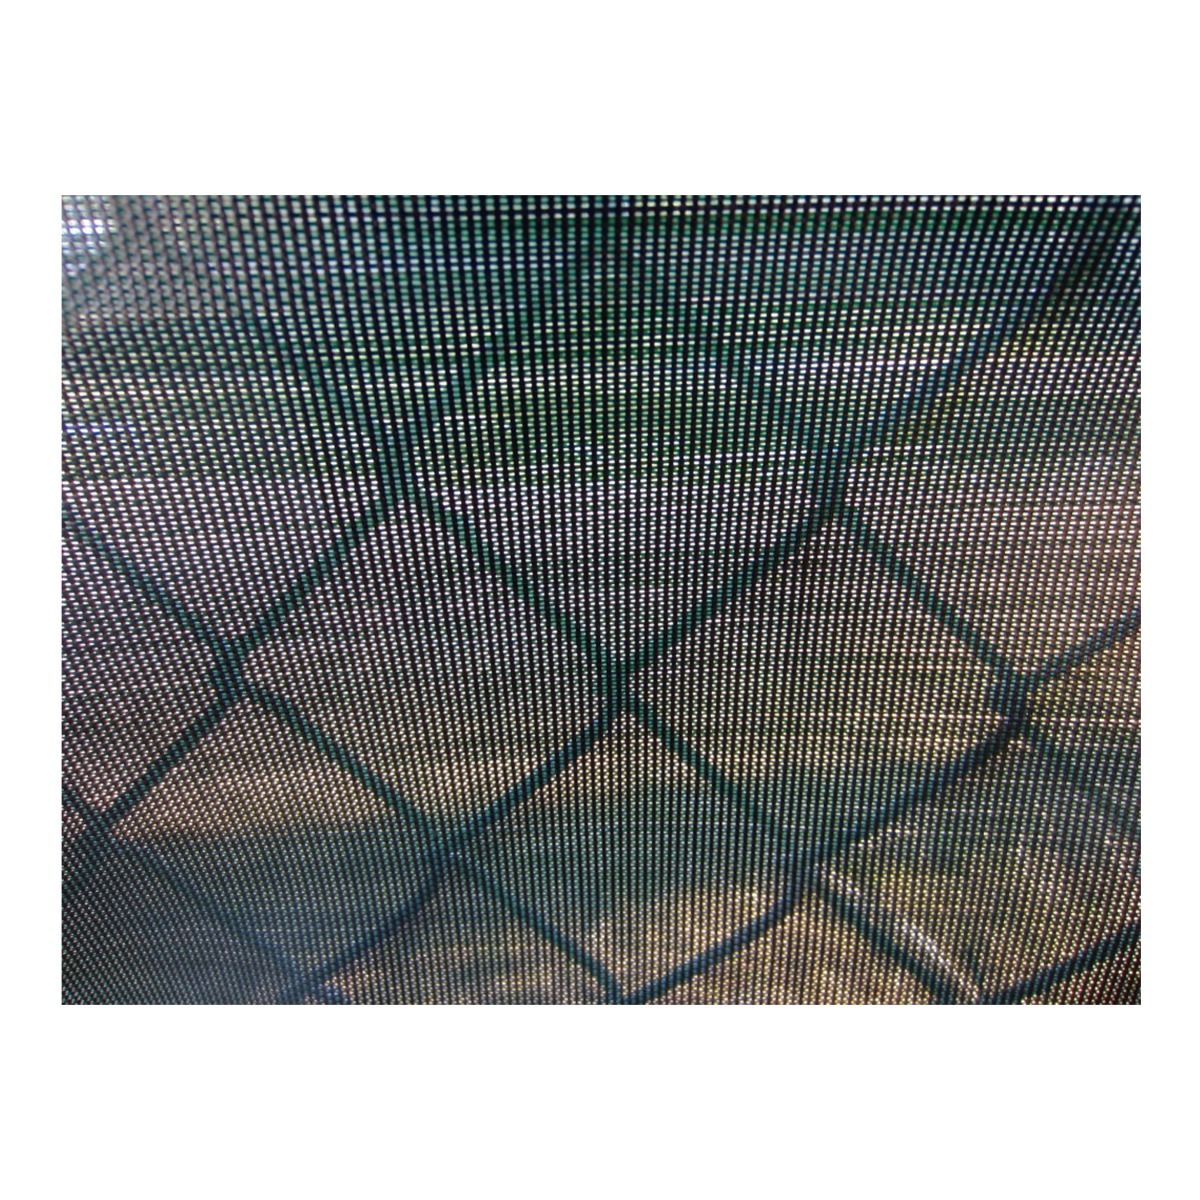 CLOSED MESH POLY WIND SCREENS